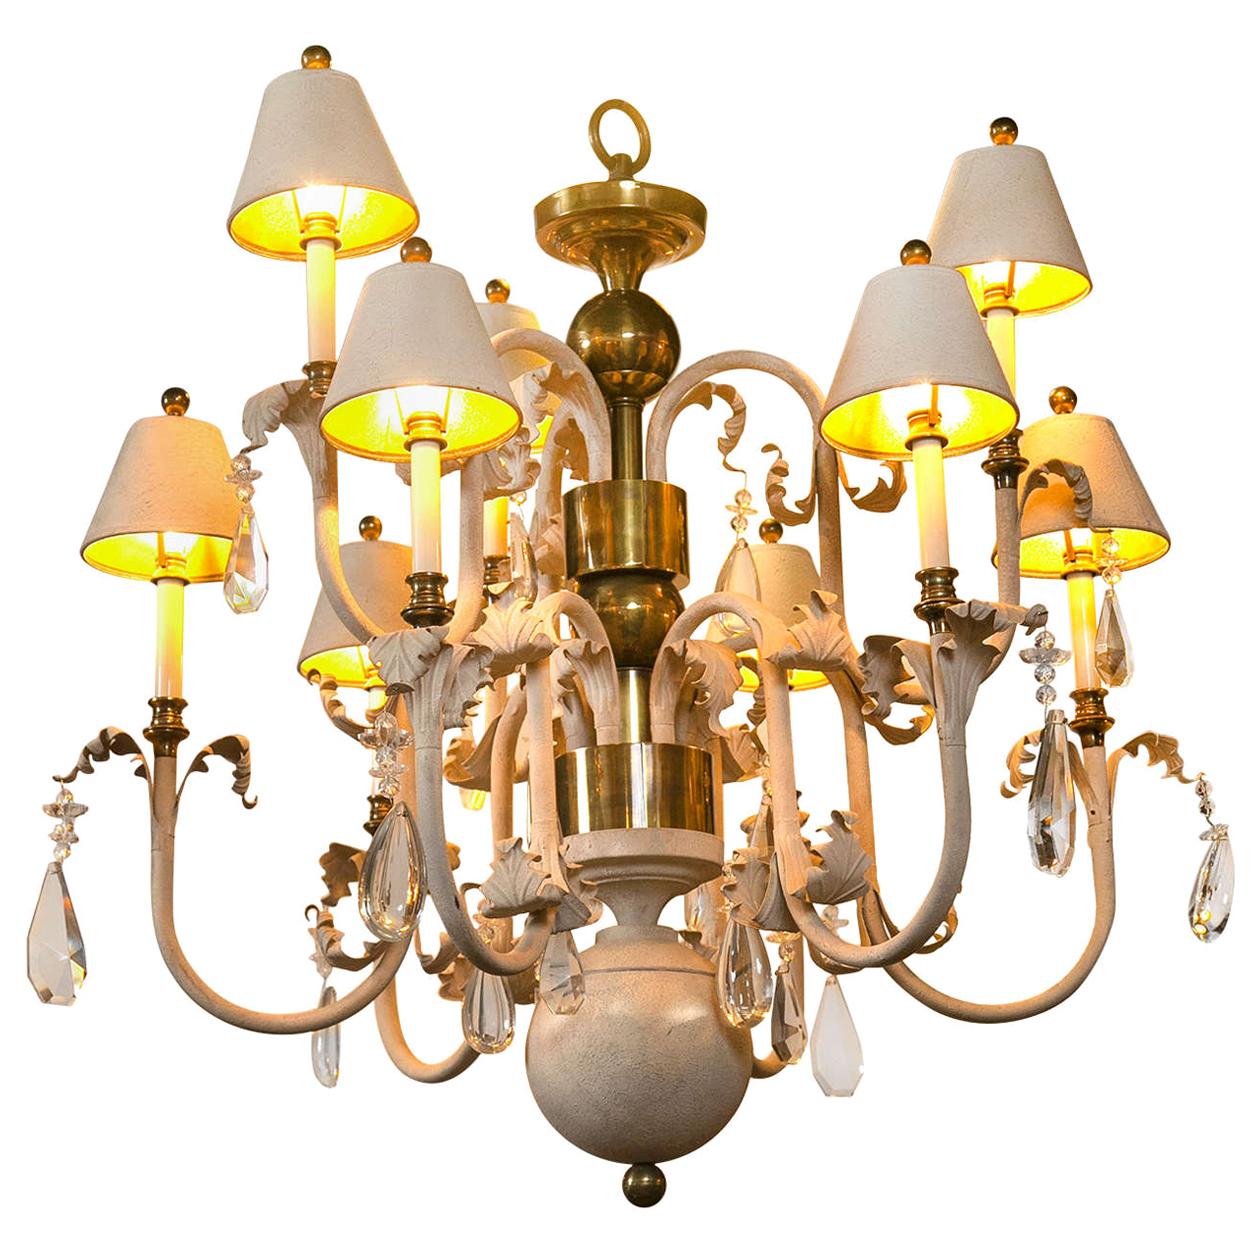 Hollywood Regency French Eight-Arm Gesso, Brass and Wood Chandelier For Sale